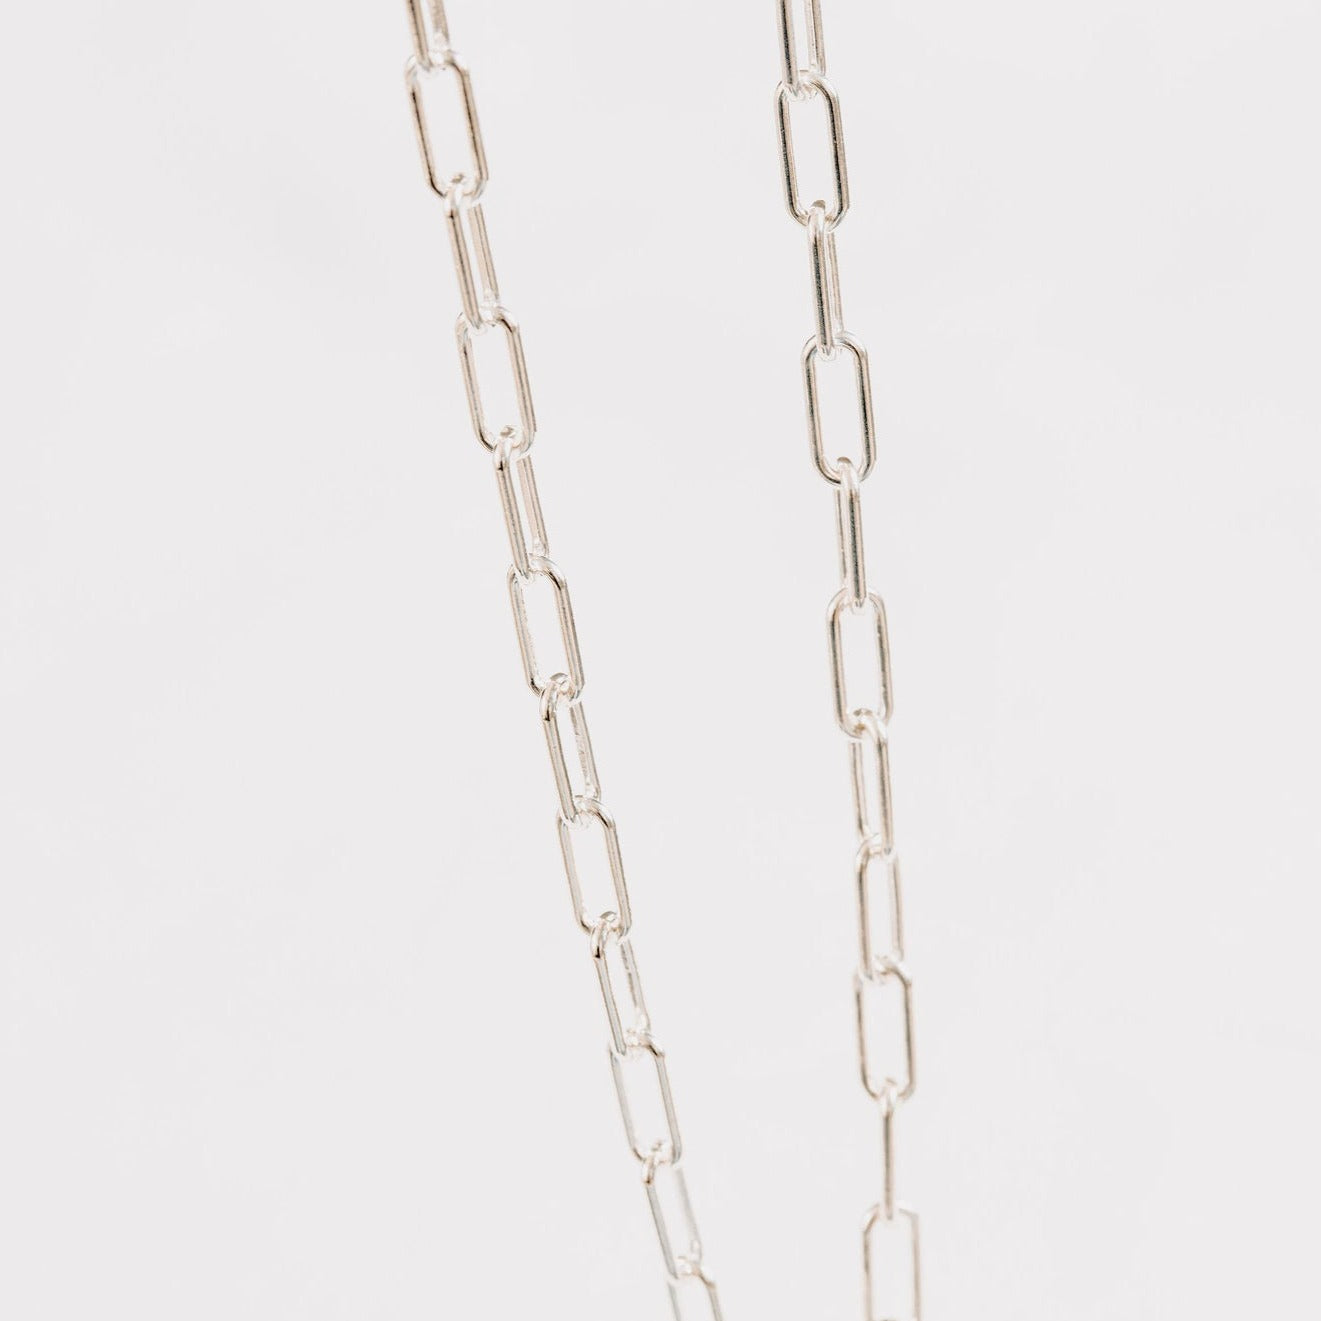 Silver Paperclip chain